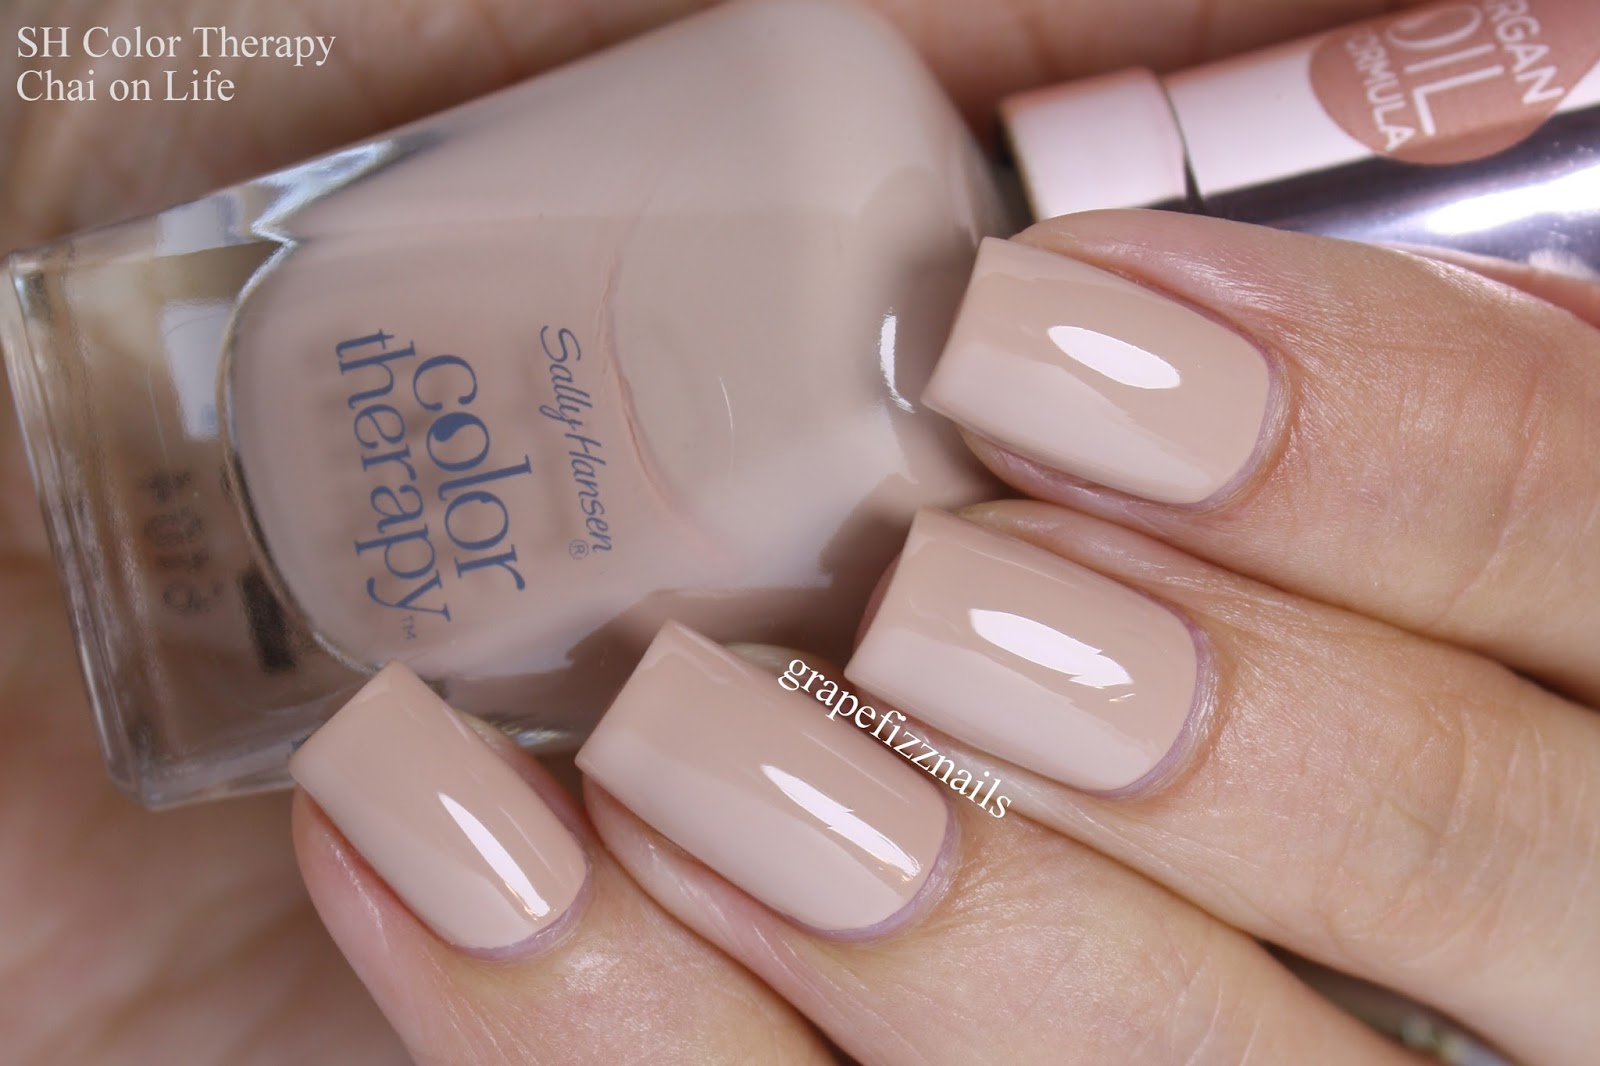 9. Sally Hansen Color Therapy in "Chai on Life" - wide 9